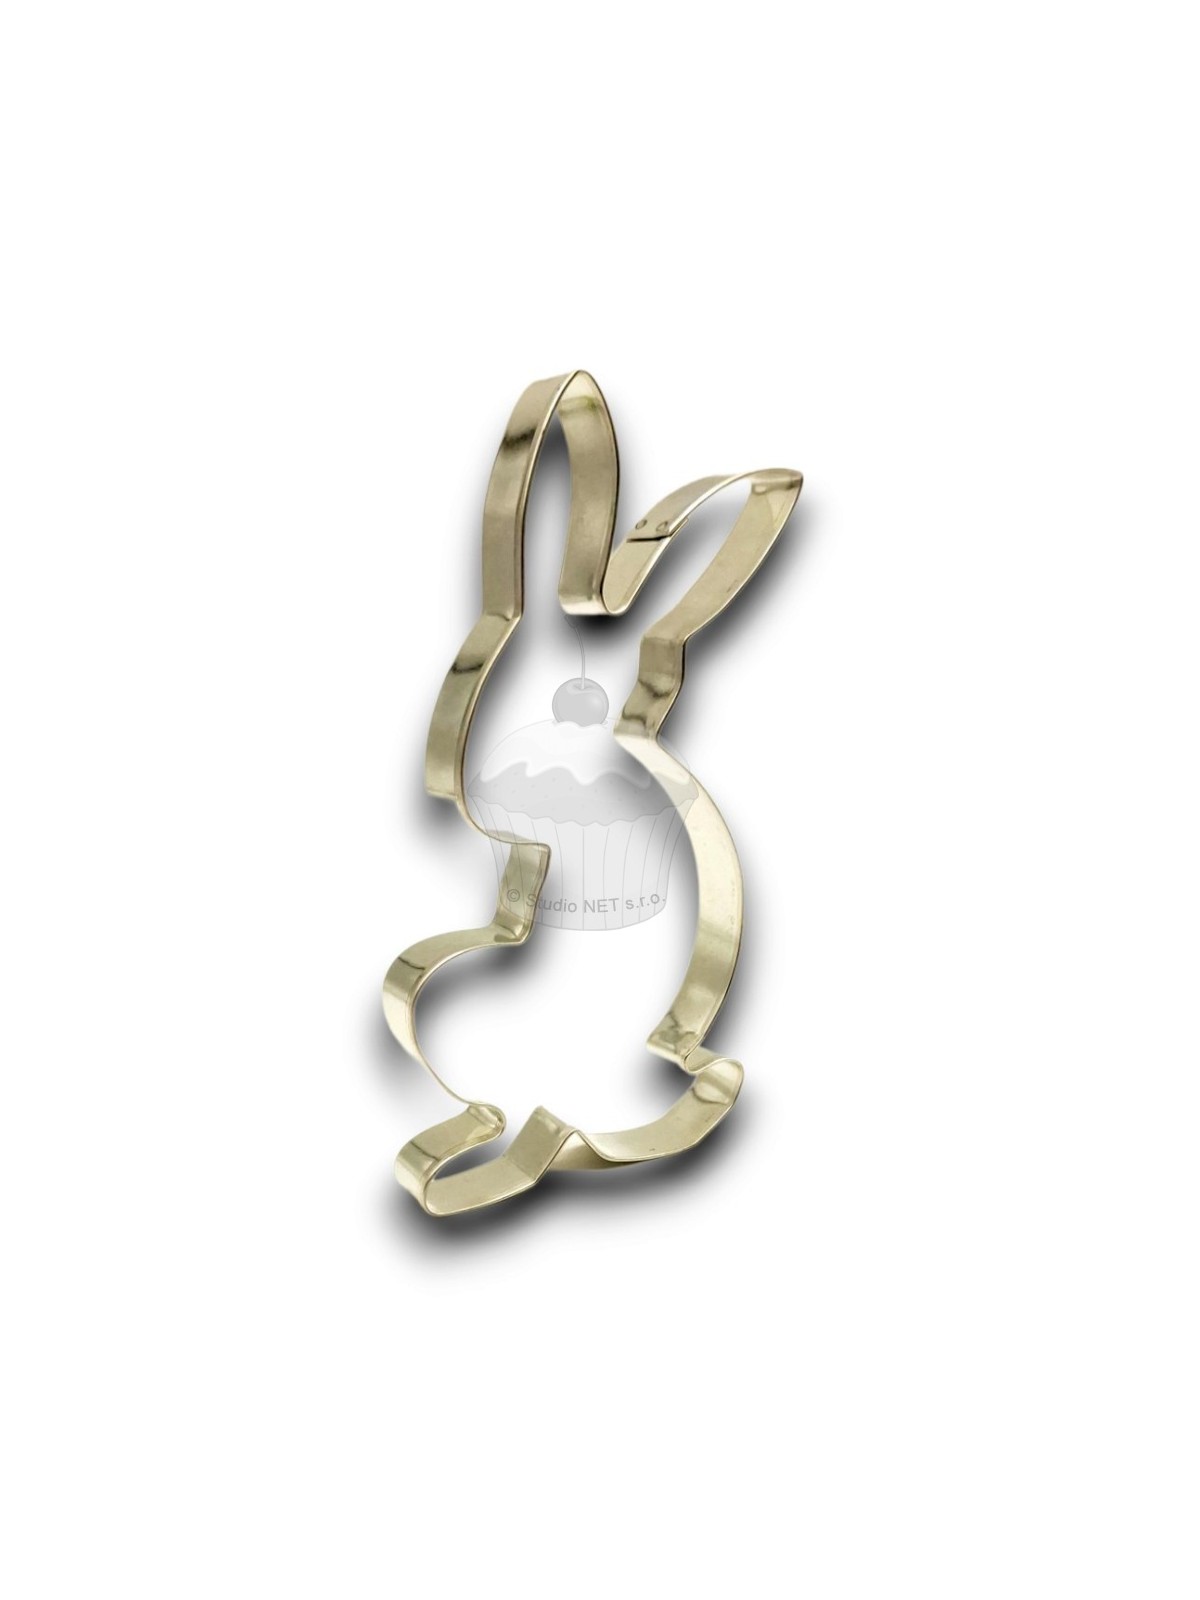 Cookie Cutter - Bunny sitting